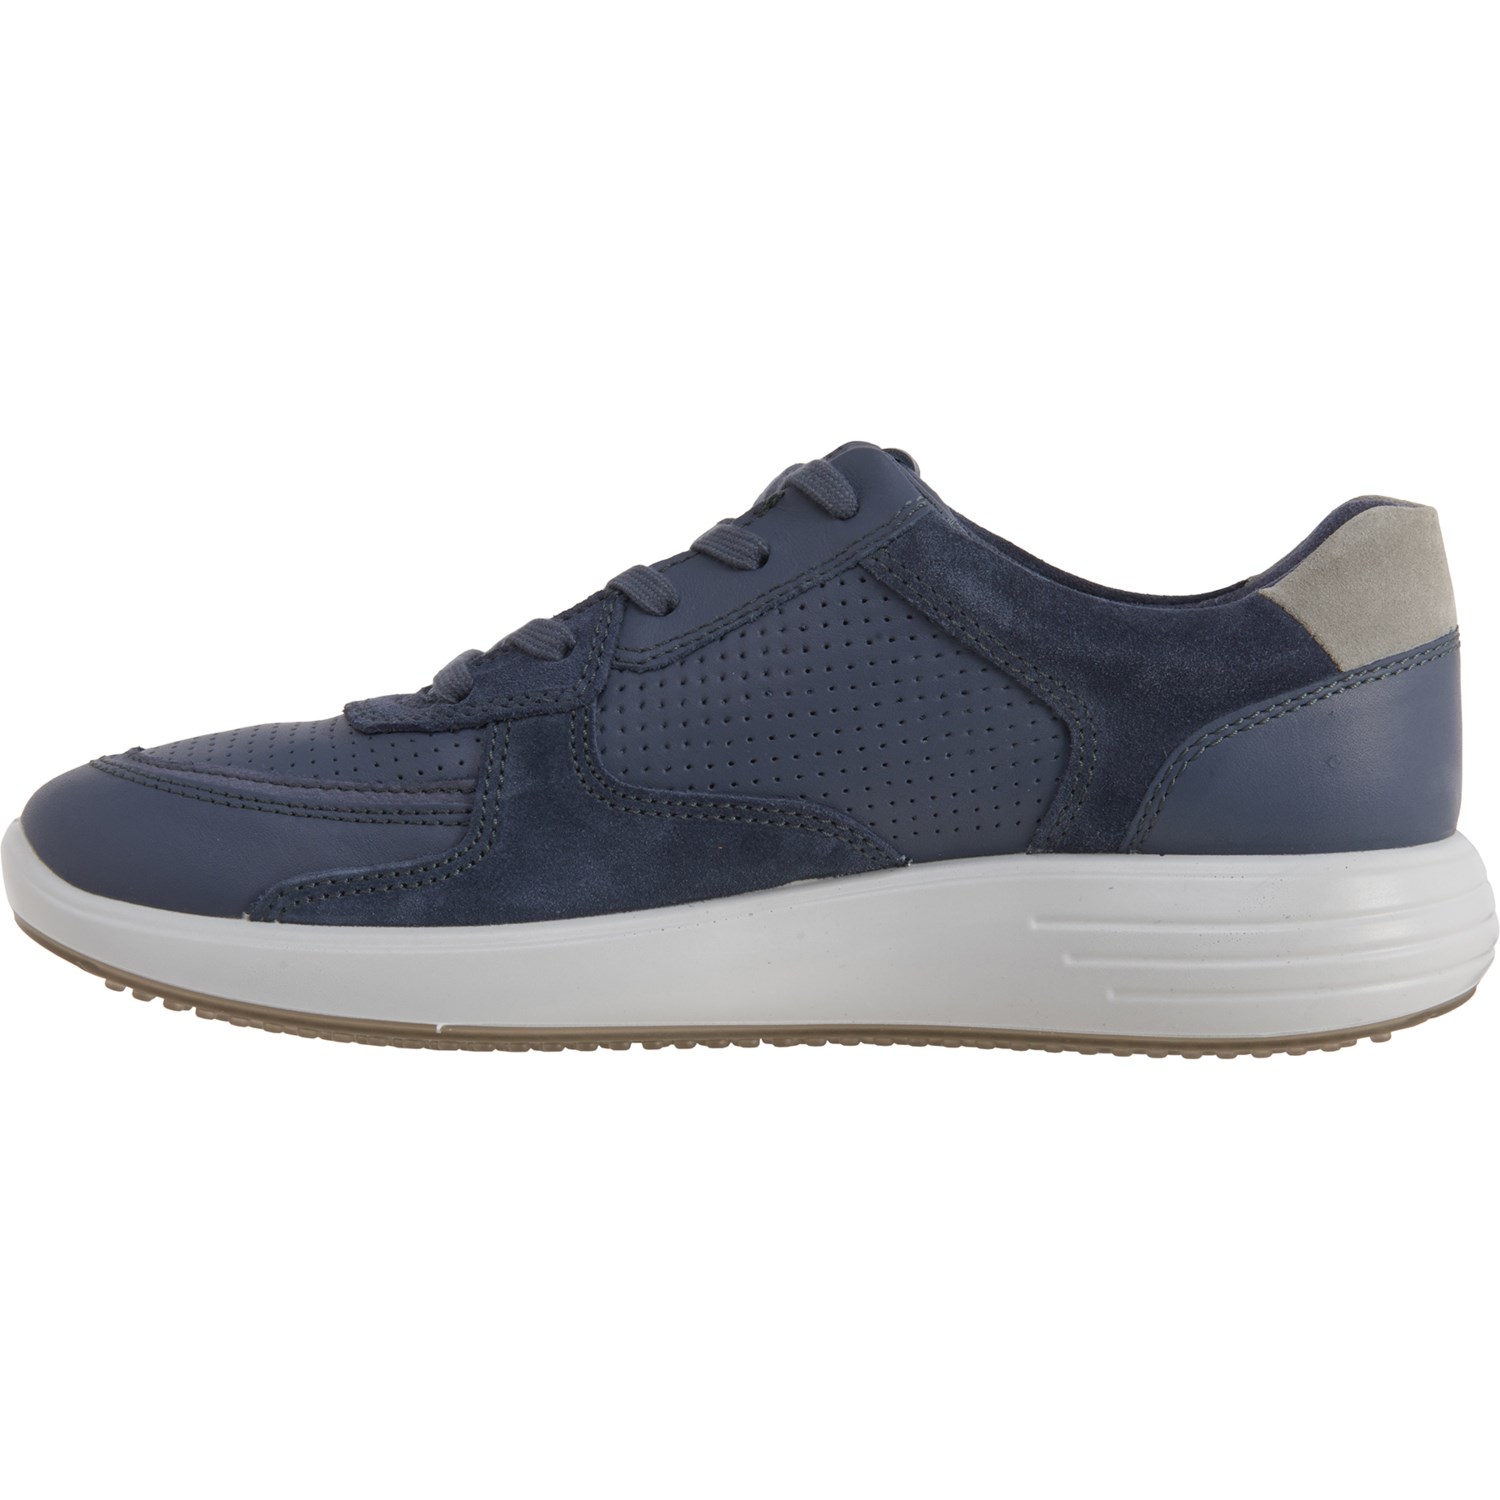 ECCO Soft 7 Runner Casual Sneakers (For Men) - Save 57%